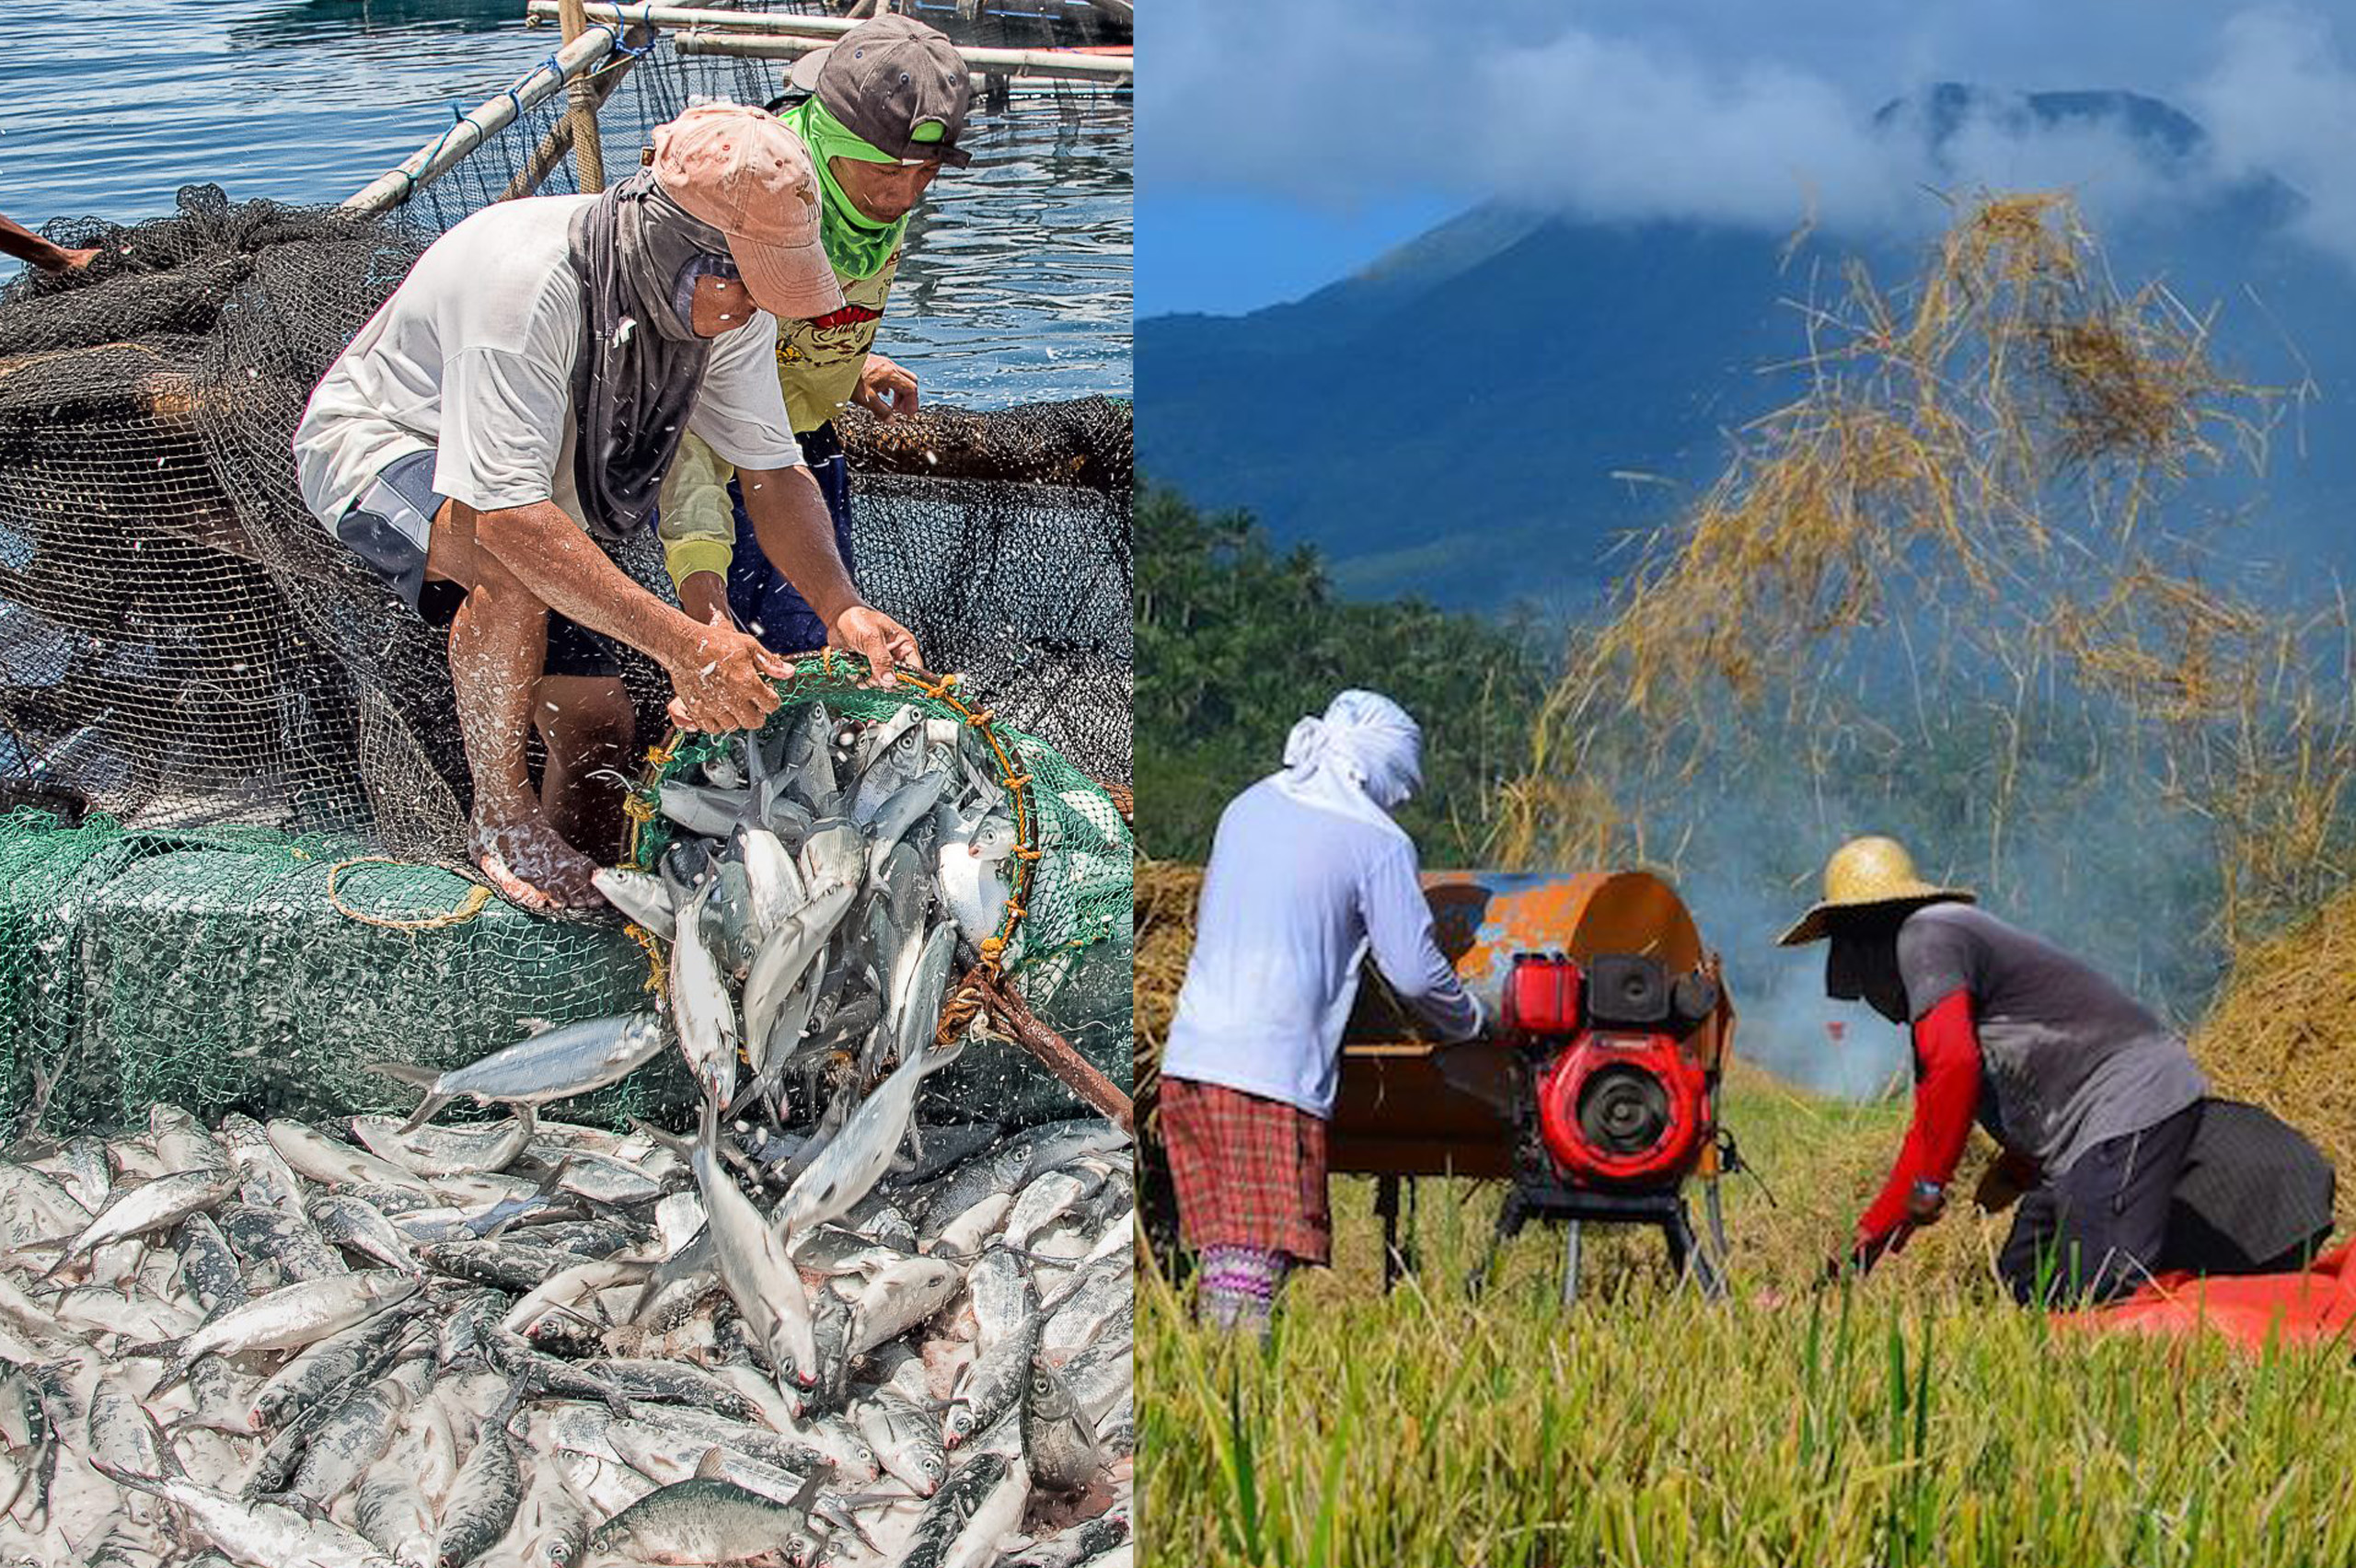 Farming, fishing and food value chain activities continue under